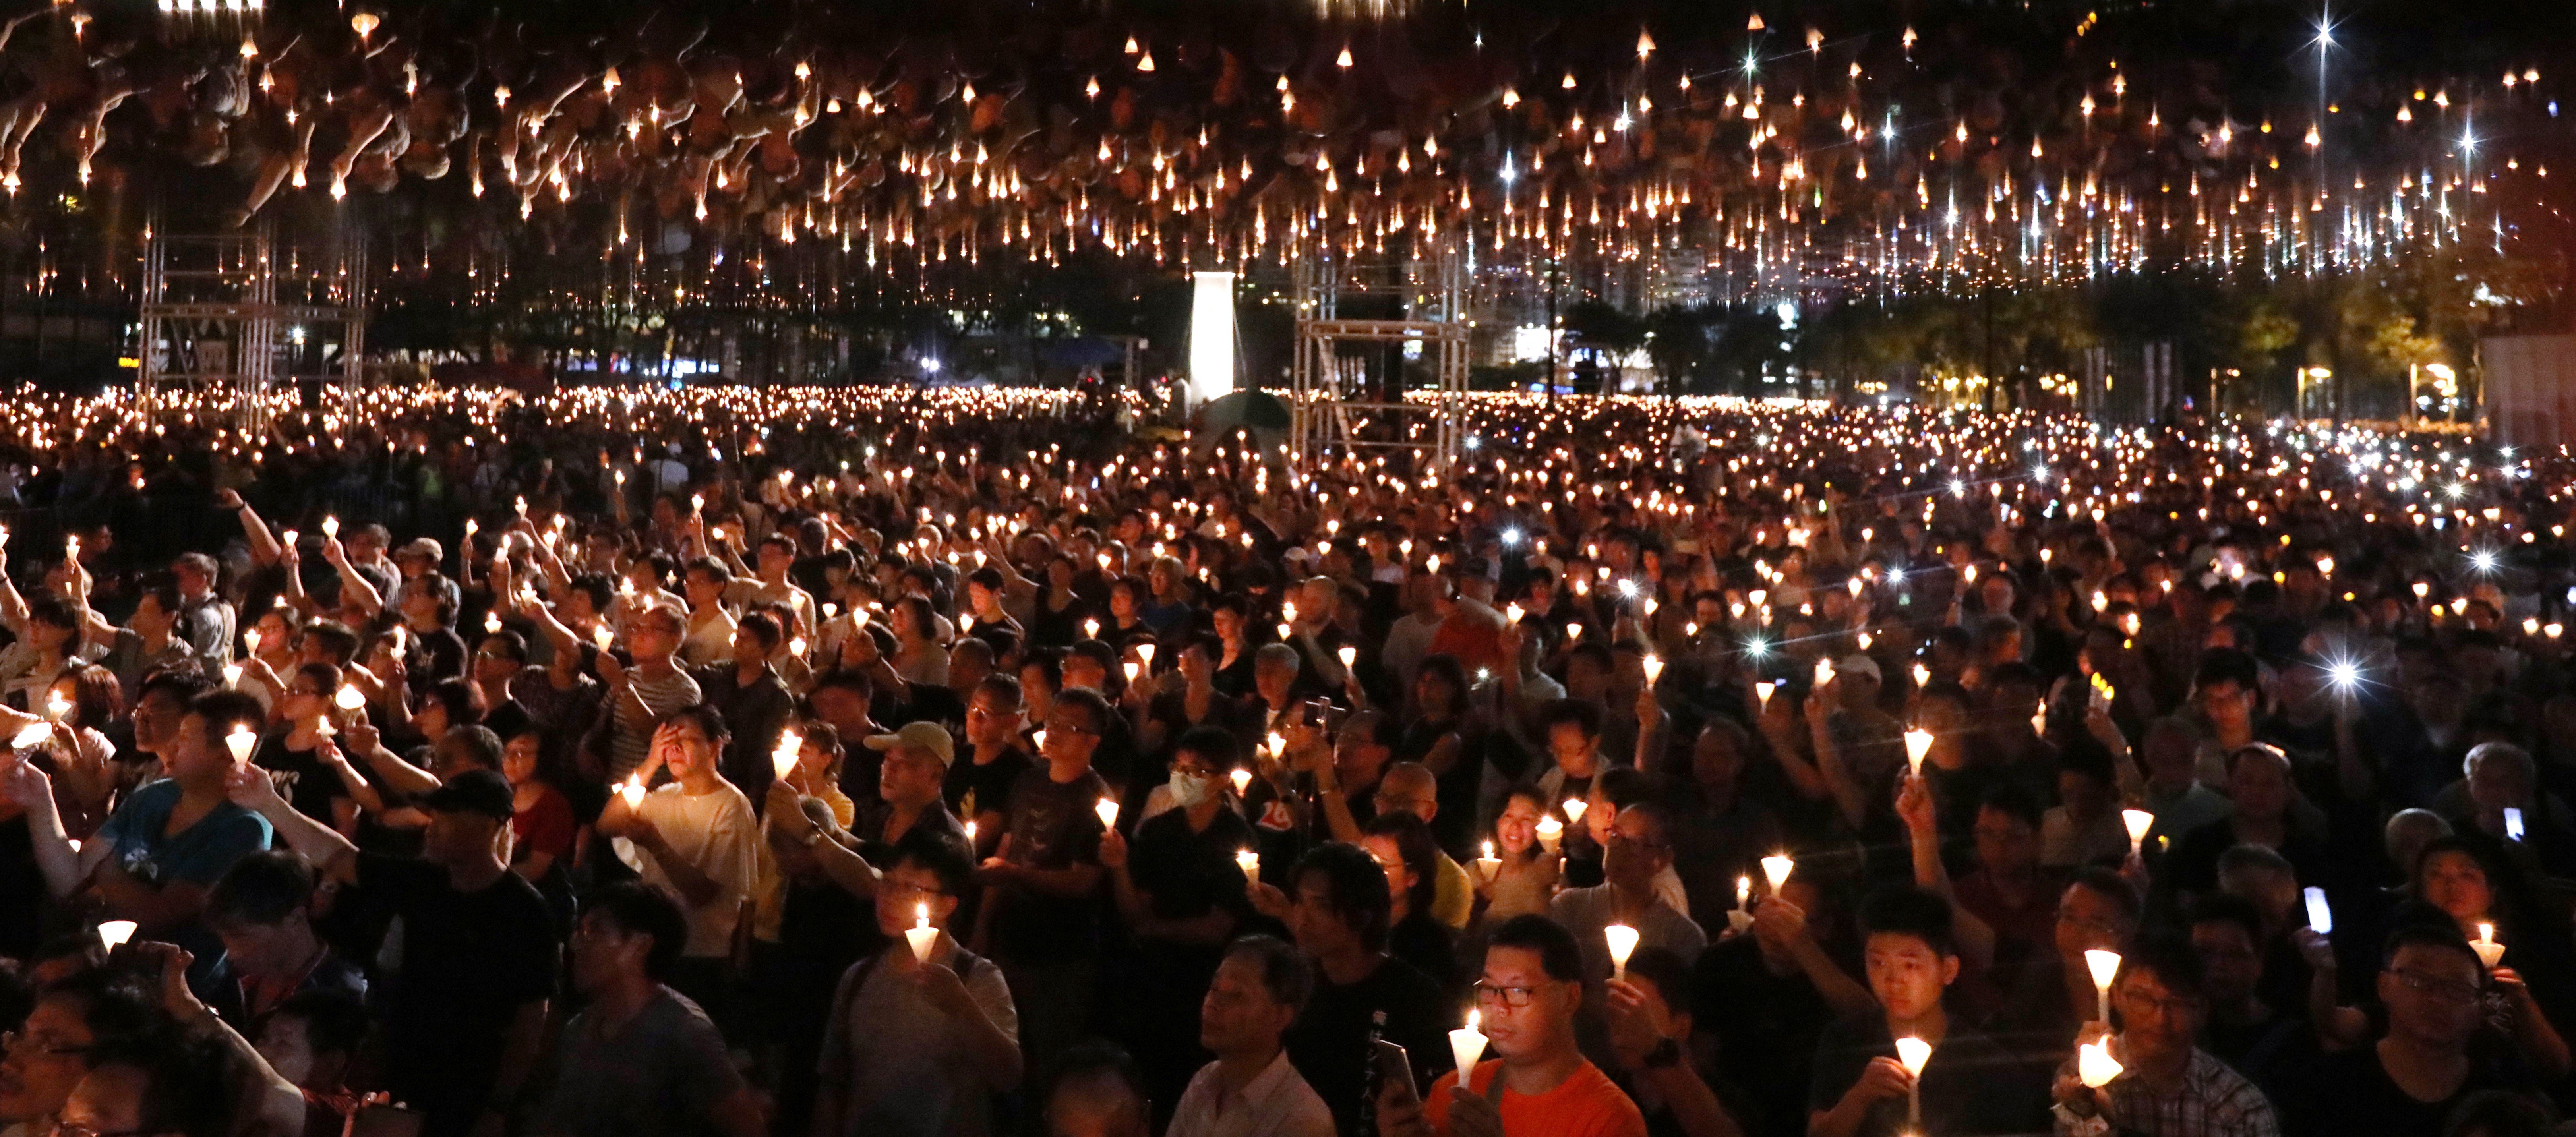 The 30th anniversary June 4 candlelight vigil at Victoria Park drew 180,000 people, according to organisers. Photo: Felix Wong